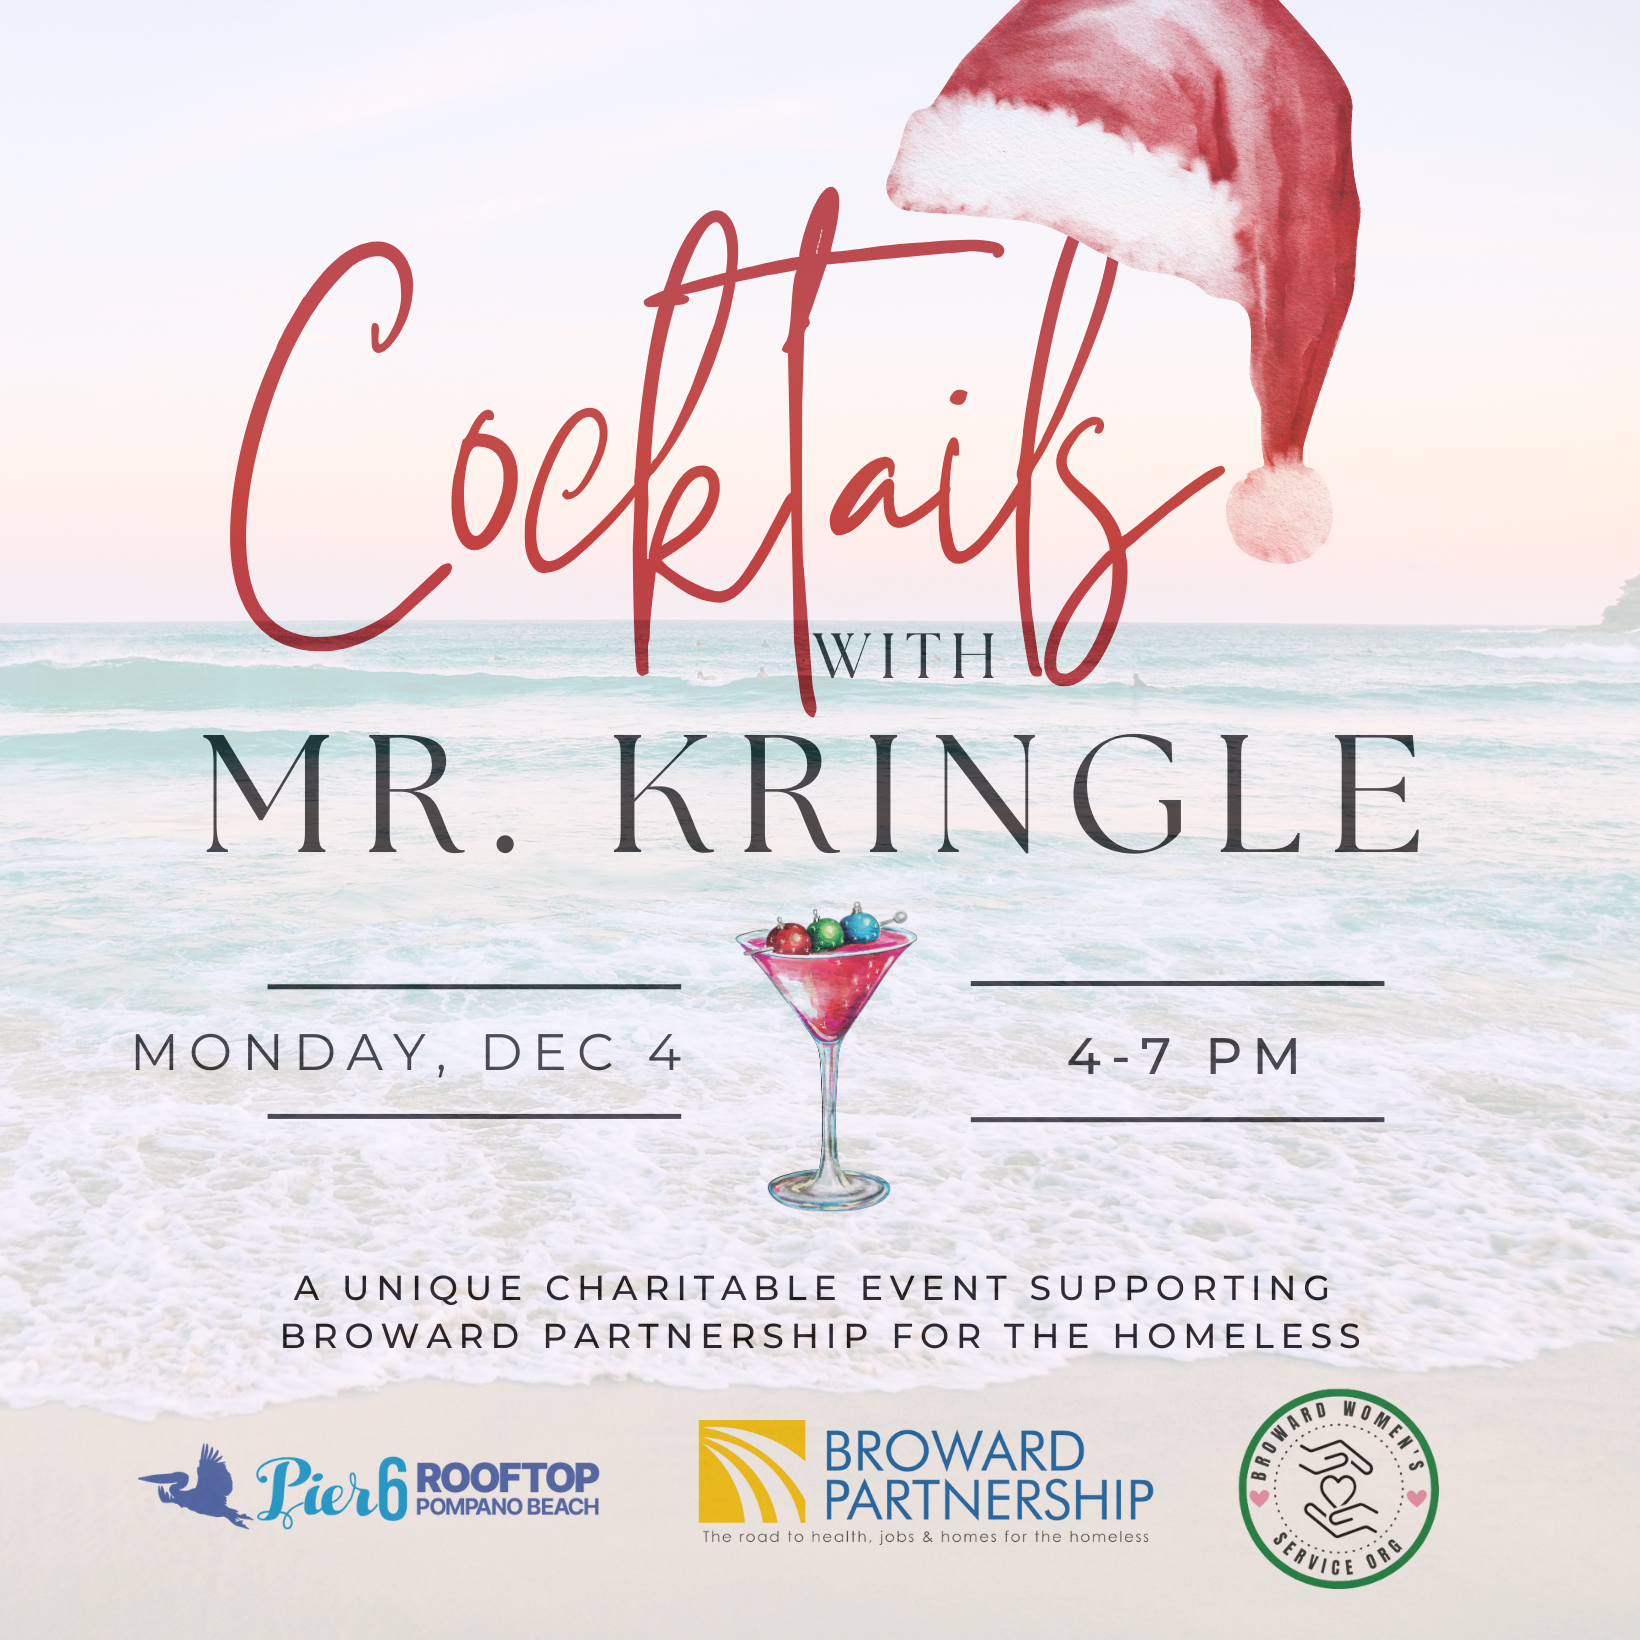 Join us for Cocktails with Mr. Kringle - a unique charitable holiday event benefiting Broward Partnership for the Homeless